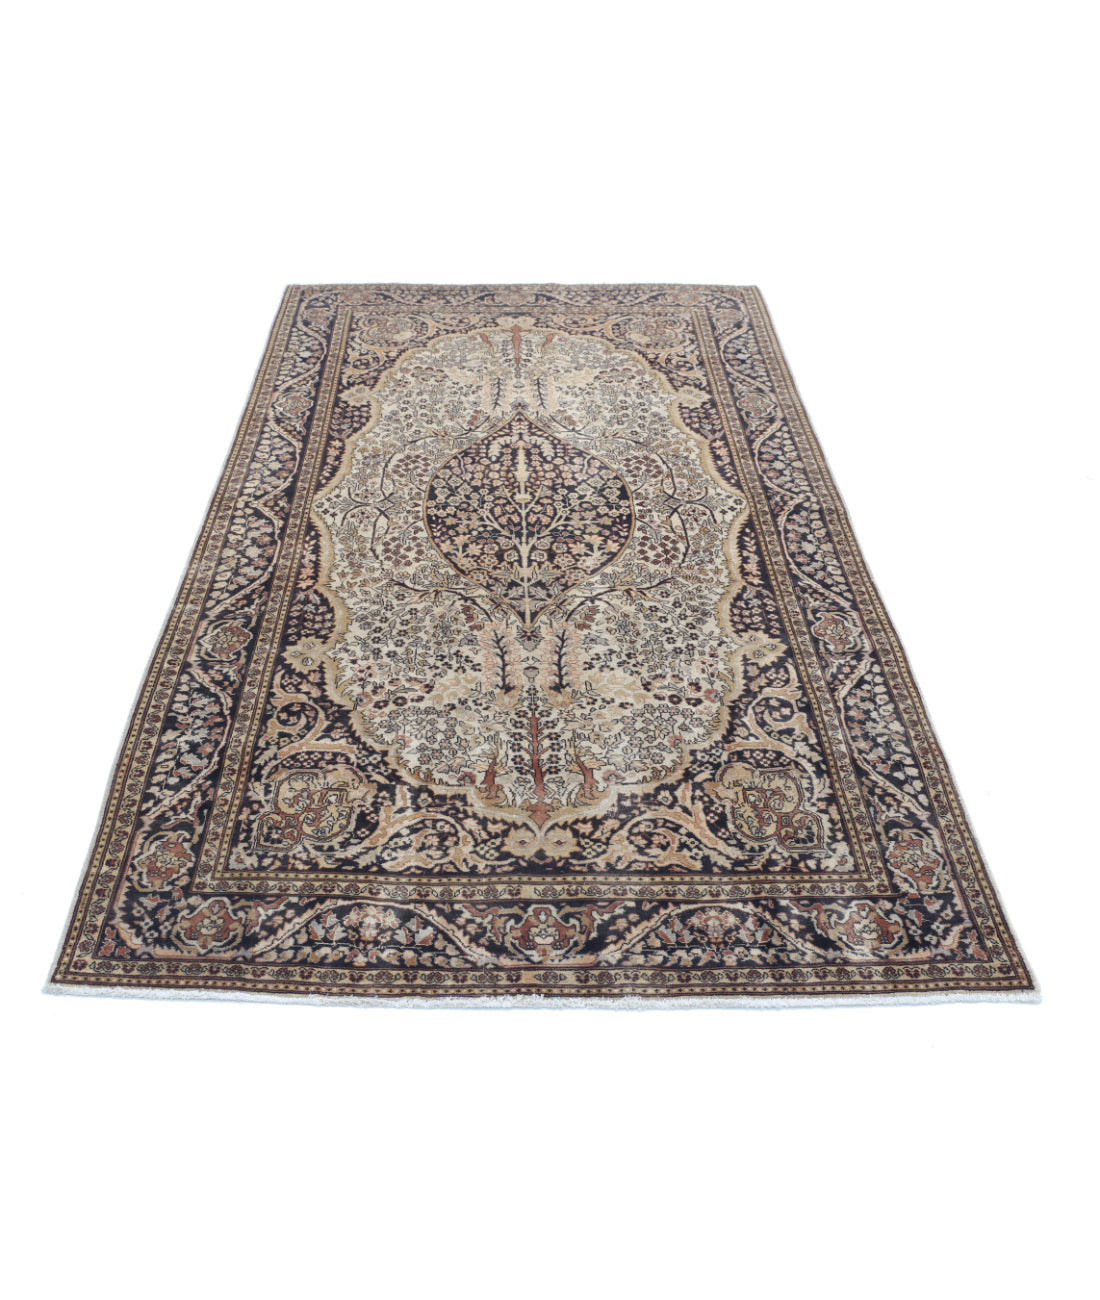 Hand Knotted Antique Persian Tabriz Wool Rug - 4'6'' x 8'0'' 4'6'' x 8'0'' (135 X 240) / Ivory / Brown